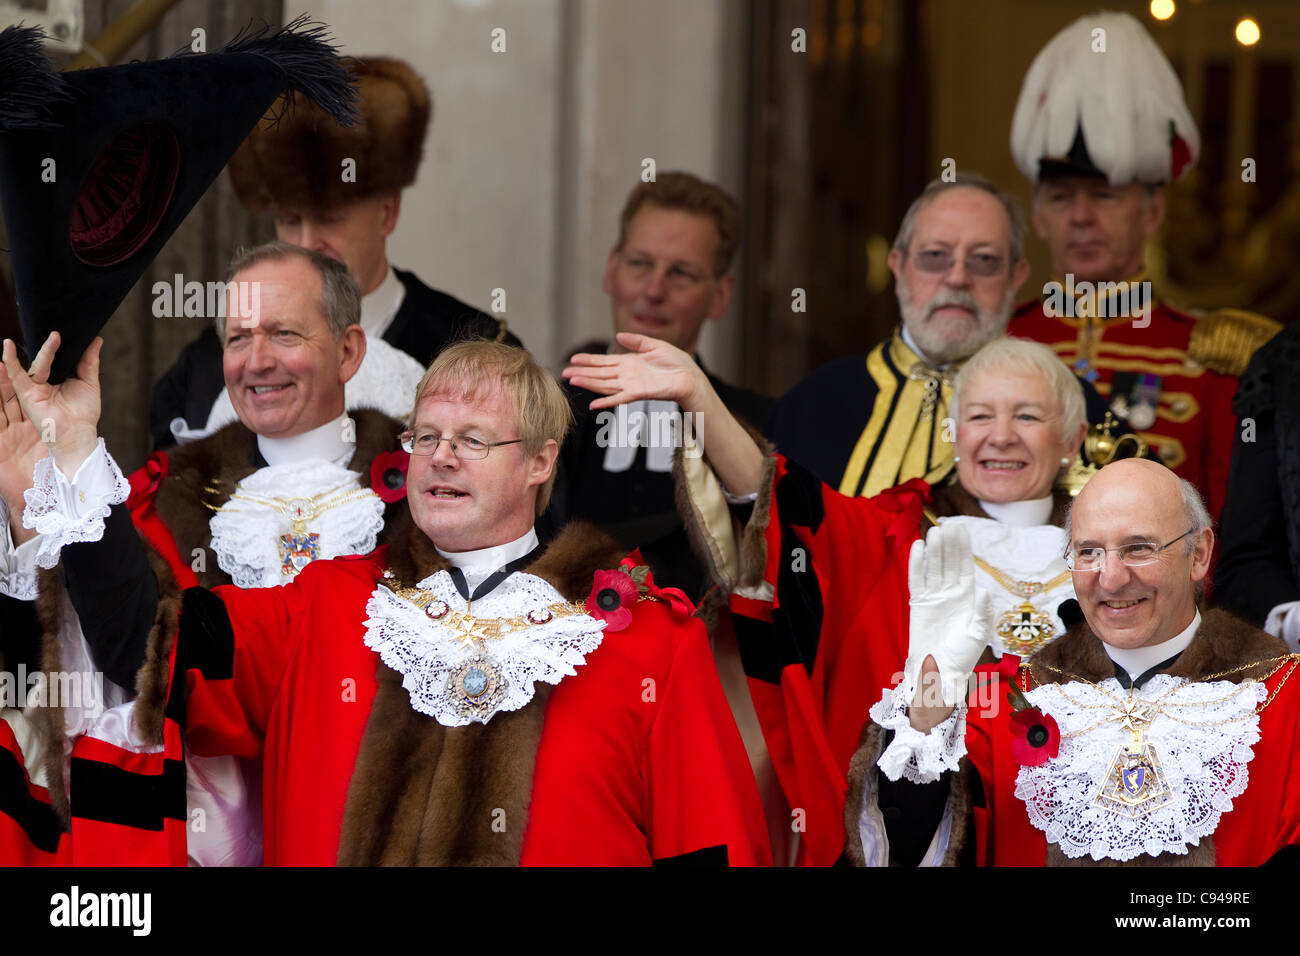 London, UK, 12.11.2011 David Wootton (left), Lord Mayor of the City of London, on the balcony with former Mayor Michael Bear (right) at Mansion House during the Lord Mayor's Show, the annual procession from the City of London to the Royal Courts of Justice. Photo:Jeff Gilbert Stock Photo